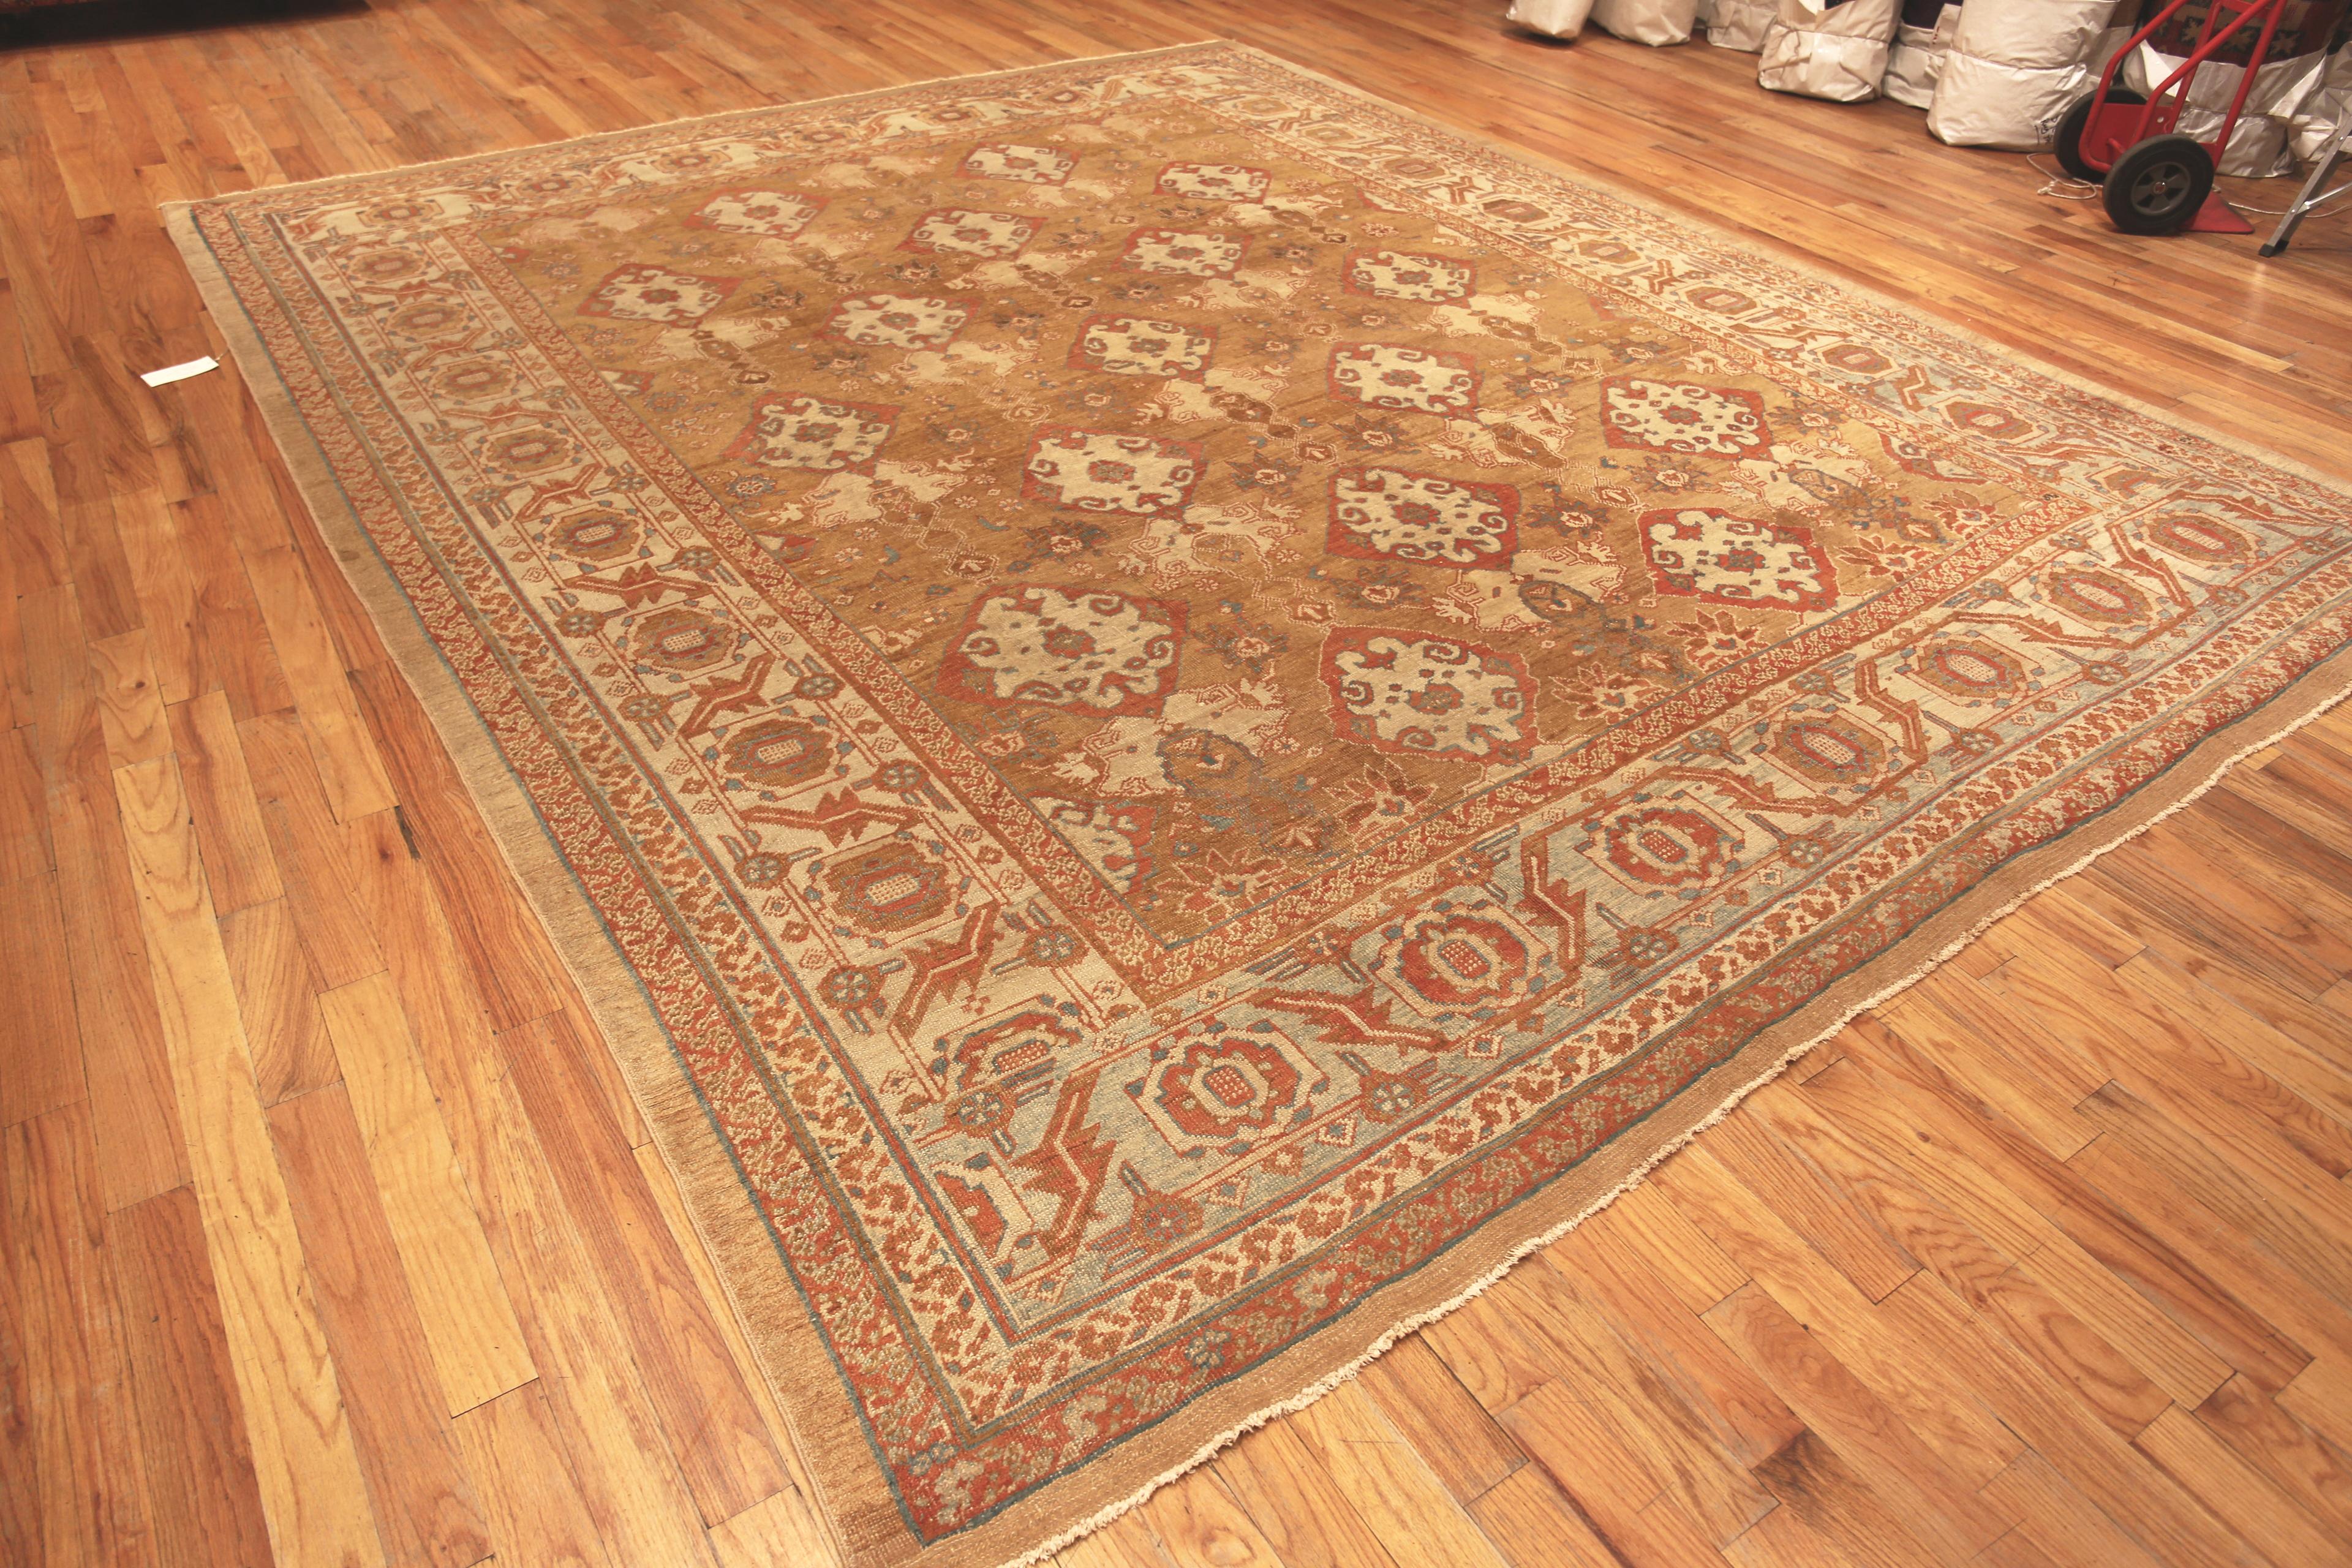 Beautiful Tribal Room Size Rustic Antique Persian Bakshaish Rug, Country of Origin: Persian rug, Circa date: 1880. Size: 10 ft 10 in x 13 ft 4 in (3.3 m x 4.06 m)


